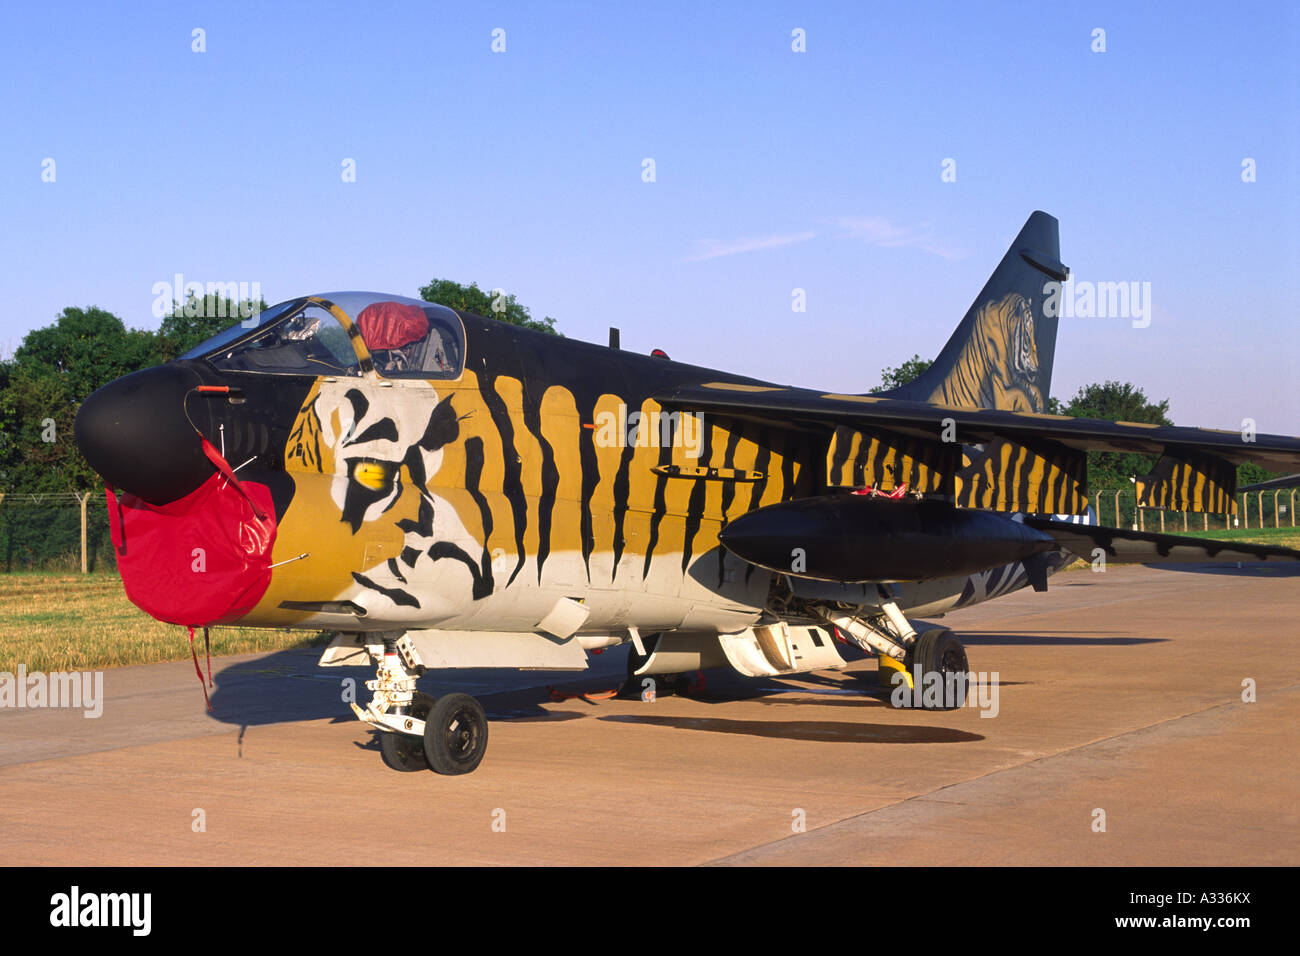 Vought A-7E Corsair, decorated with Tiger Stripes colours scheme, operated by the Hellenic Air Force. Stock Photo